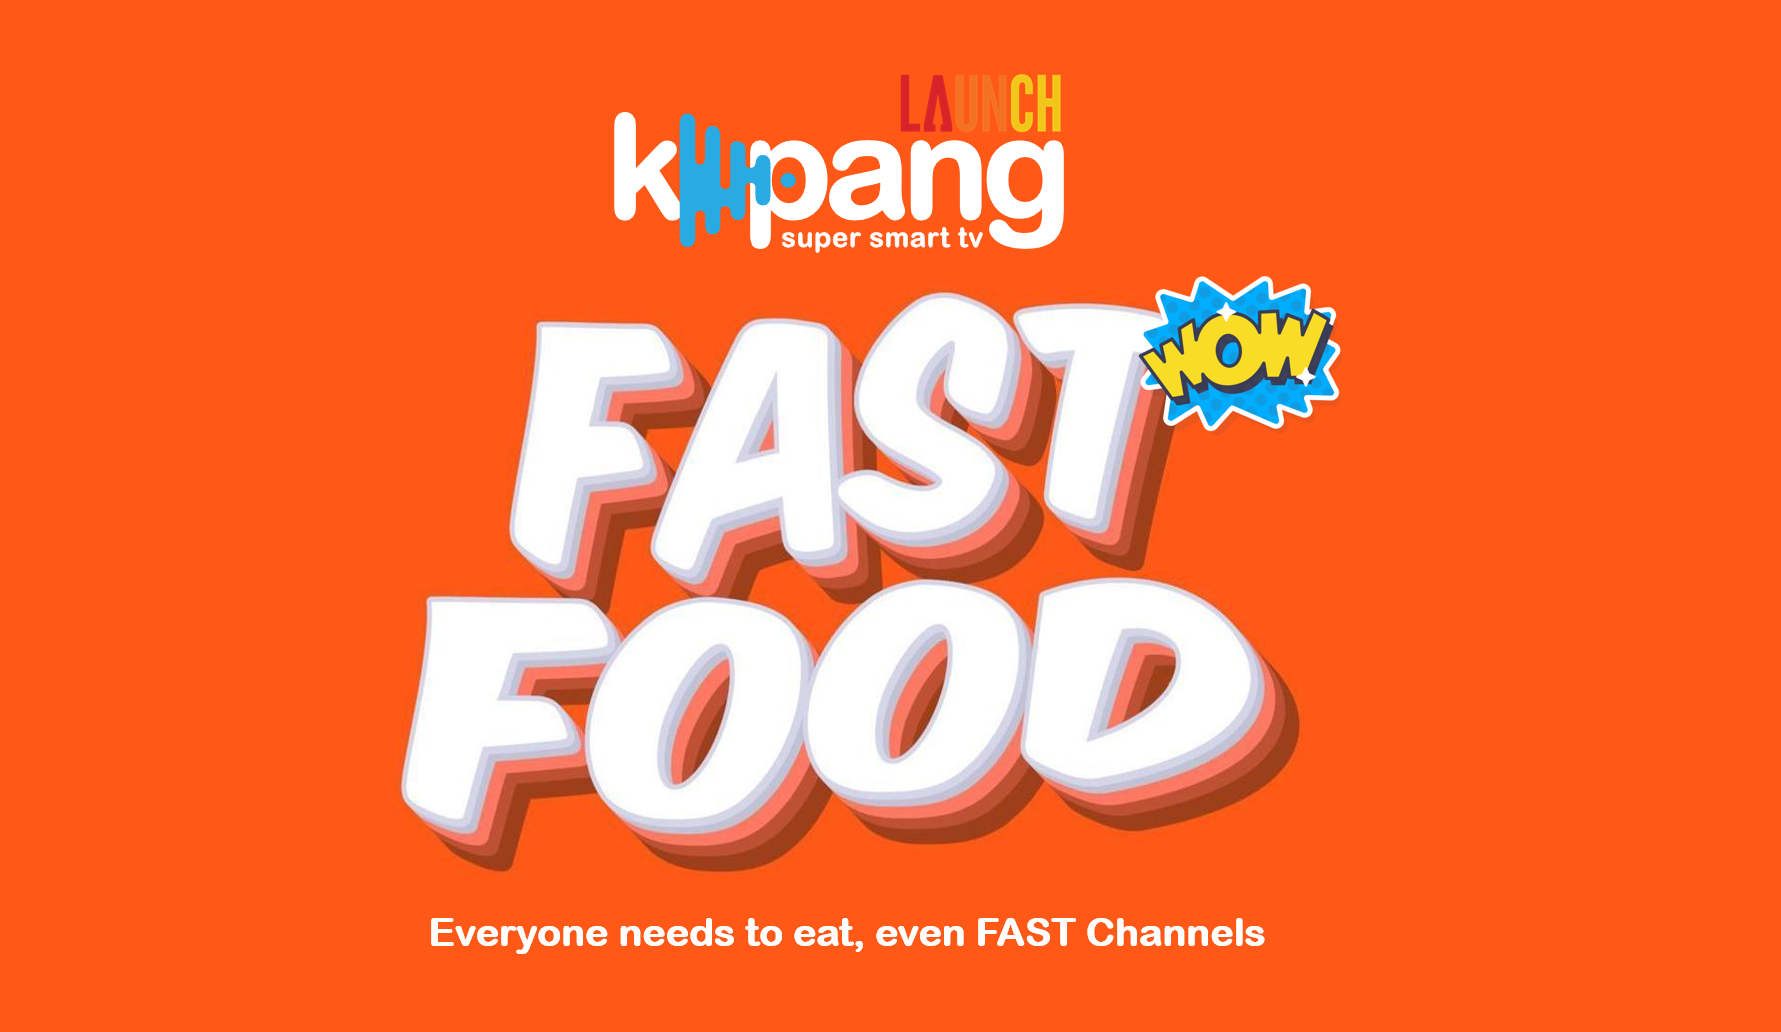 Feasting on FAST FOOD: Kapang’s Recipe for Streaming Success